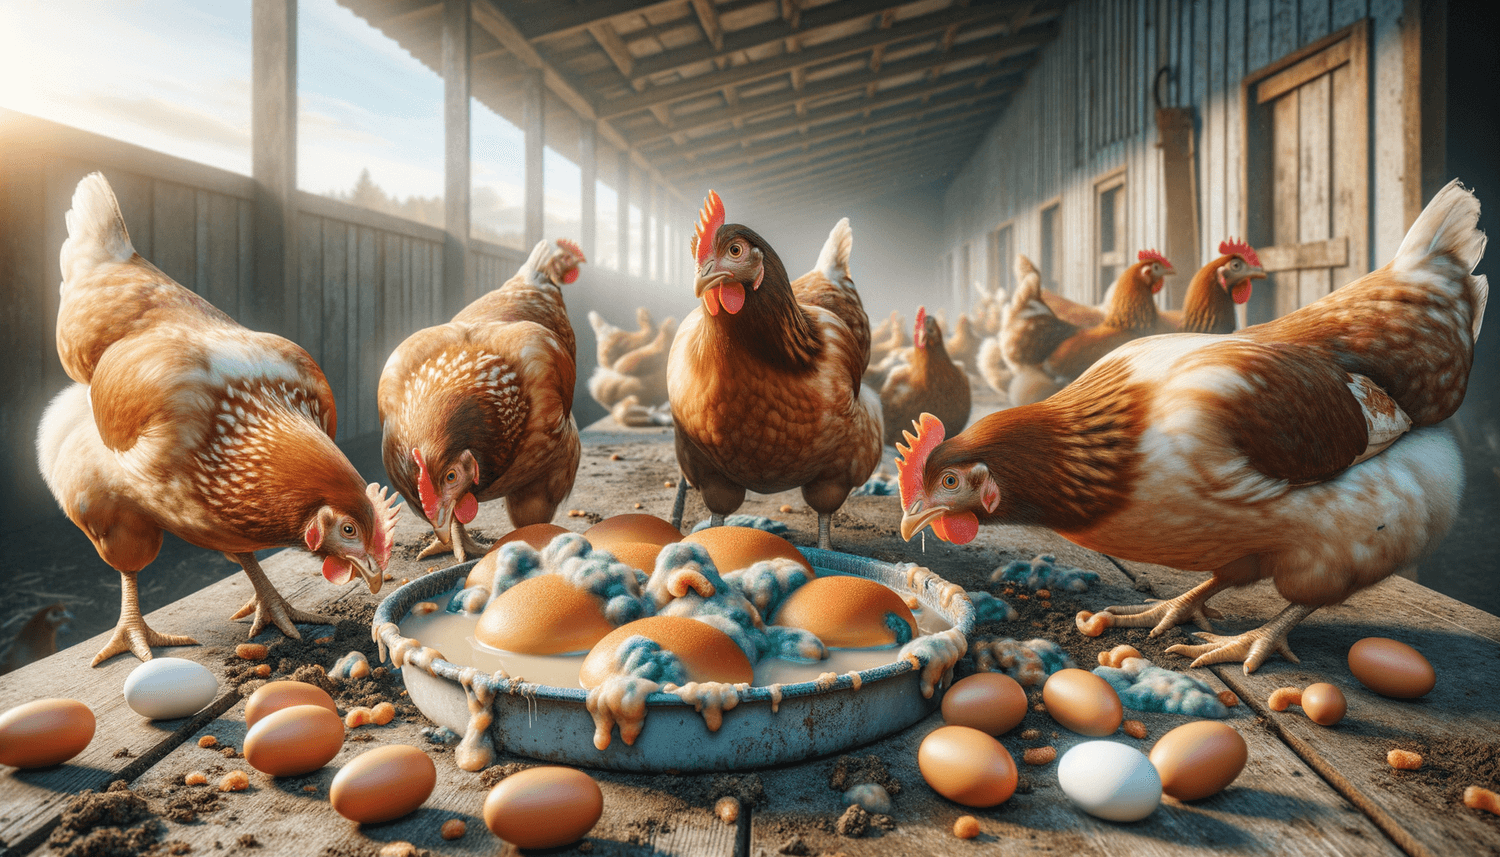 Can Chickens Eat Moldy Food?